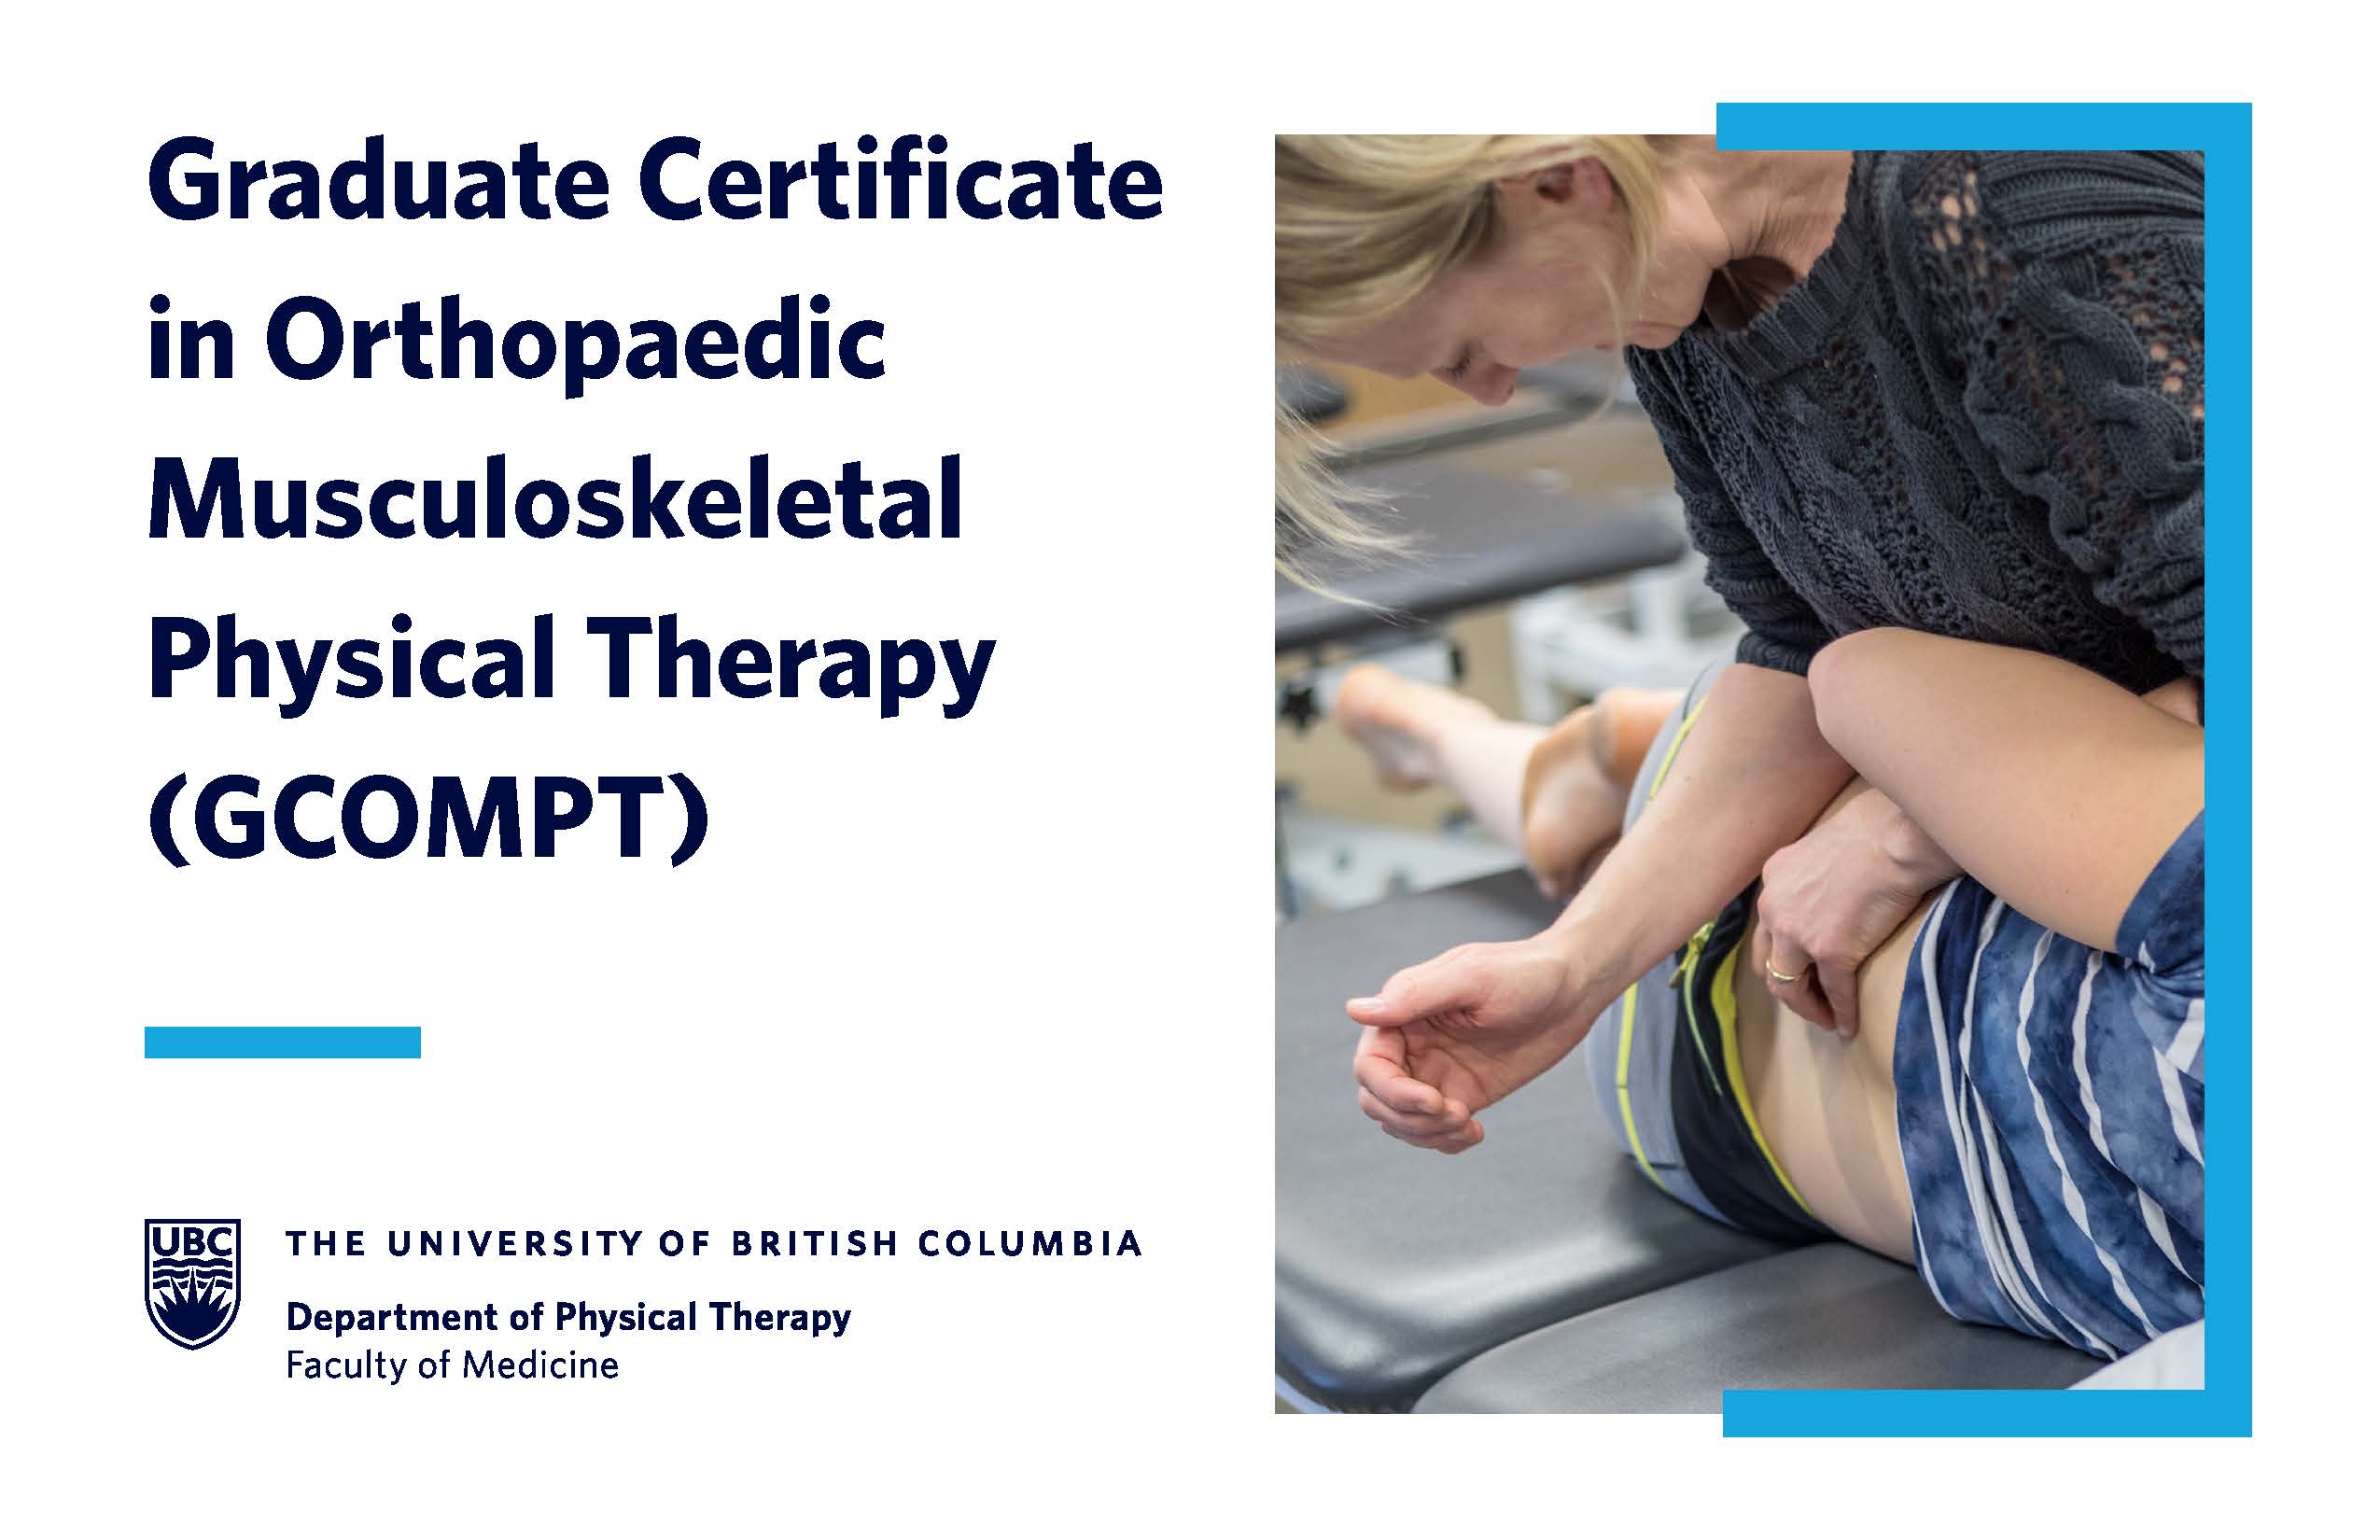 Graduate Certificate in Orthopaedic and Musculoskeletal Physical Therapy (GCOMPT)